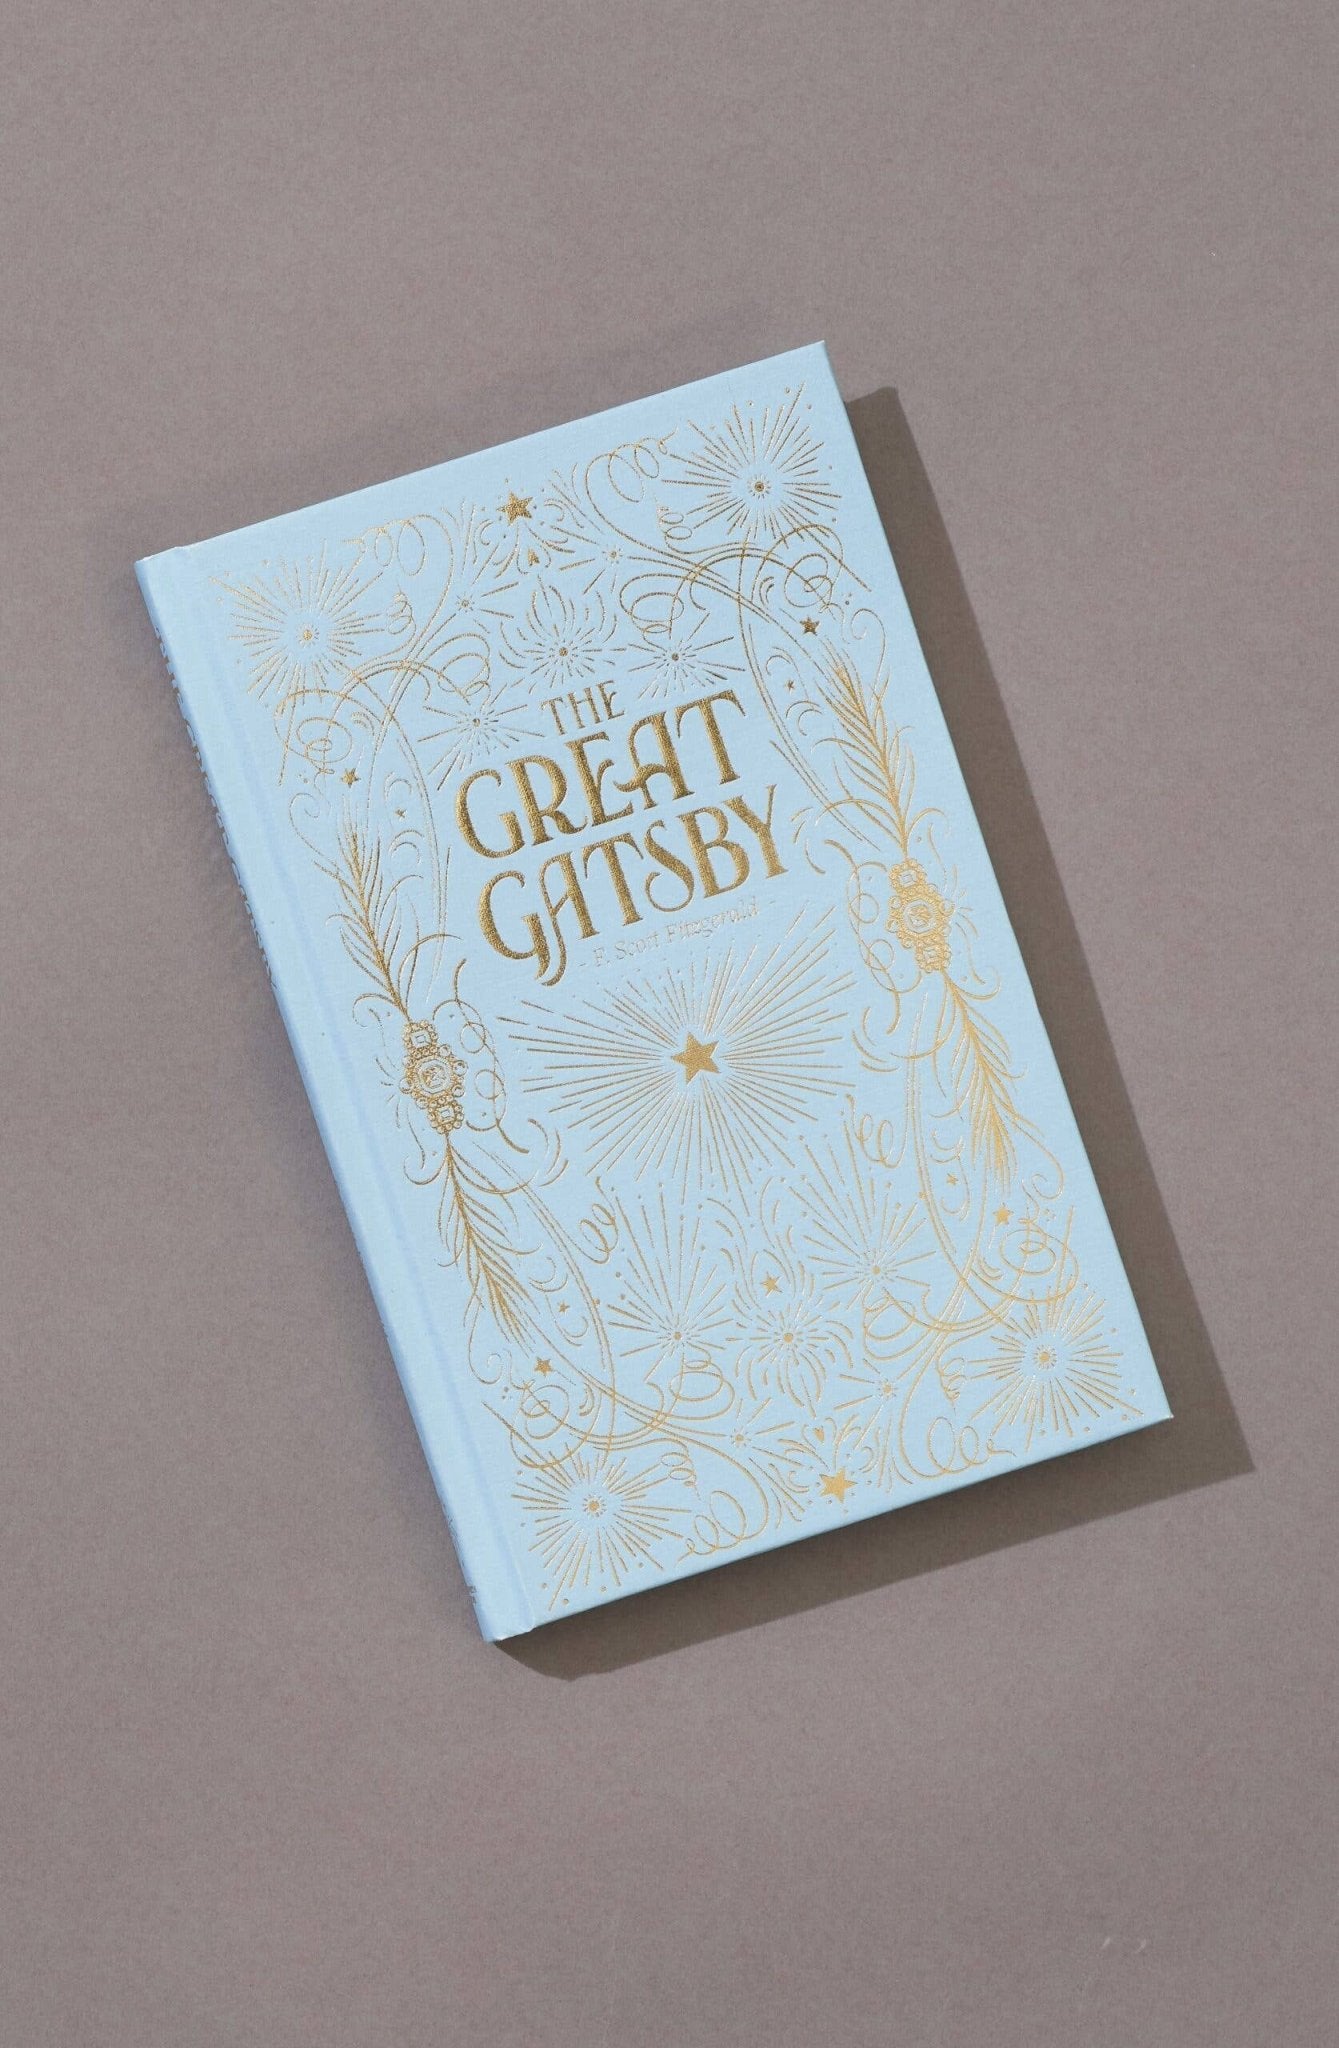 The Great Gatsby | Wordsworth Luxe Edition - Nocturne LLC